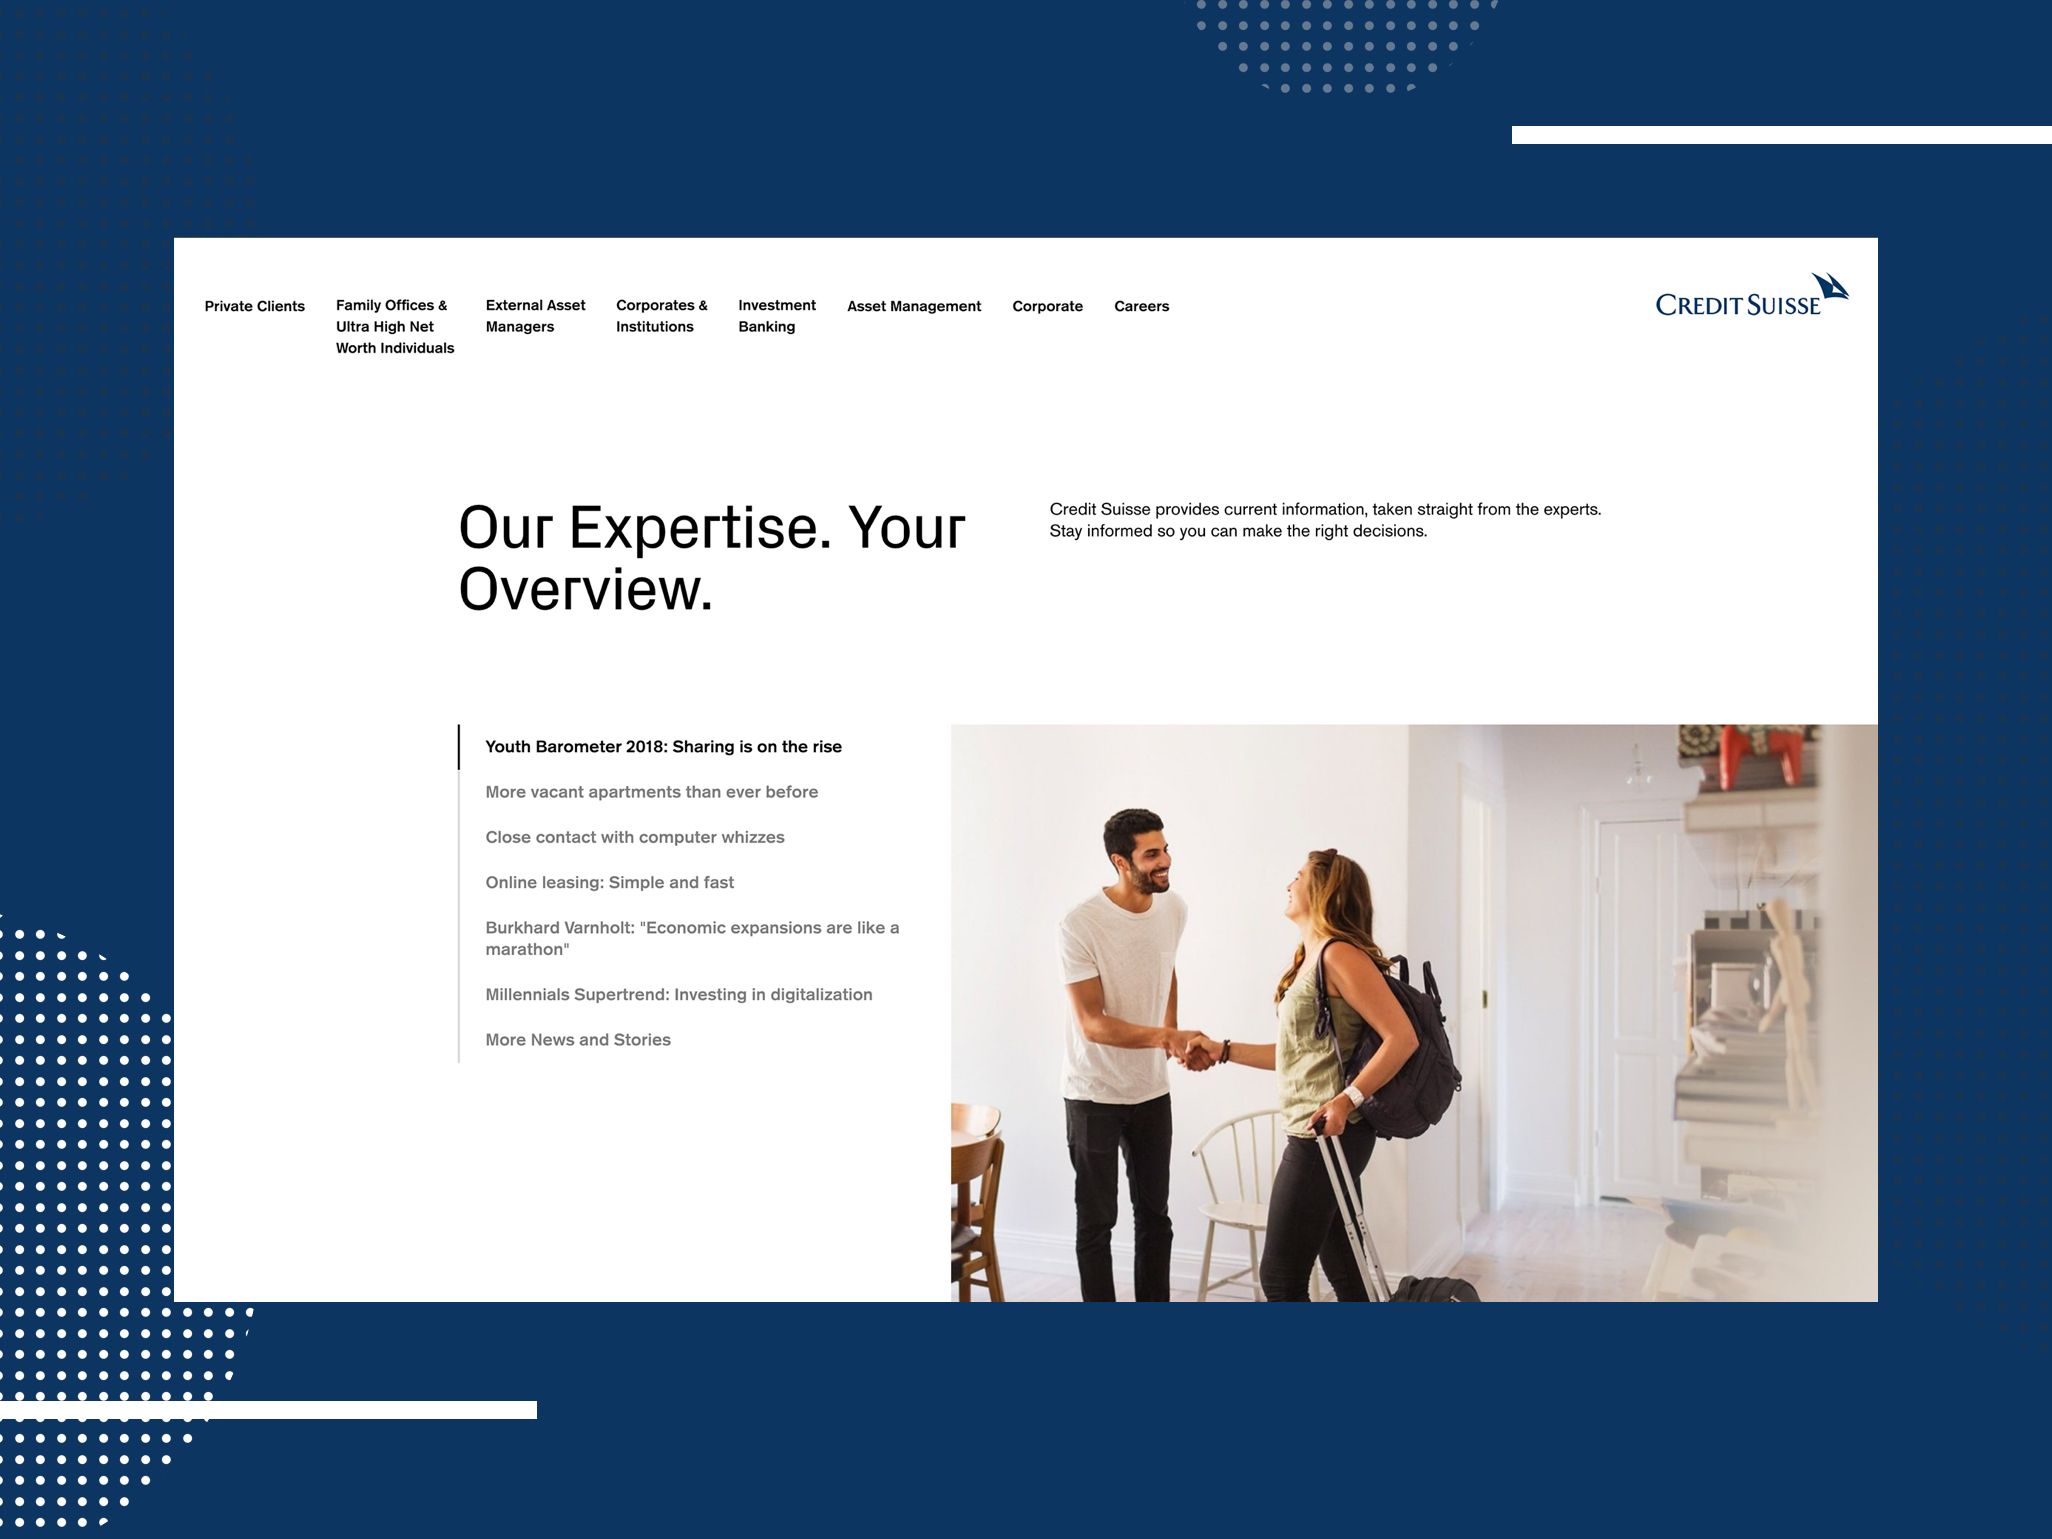 Credit Suisse - Ansicht Website: Our Expertise. Your Overview.